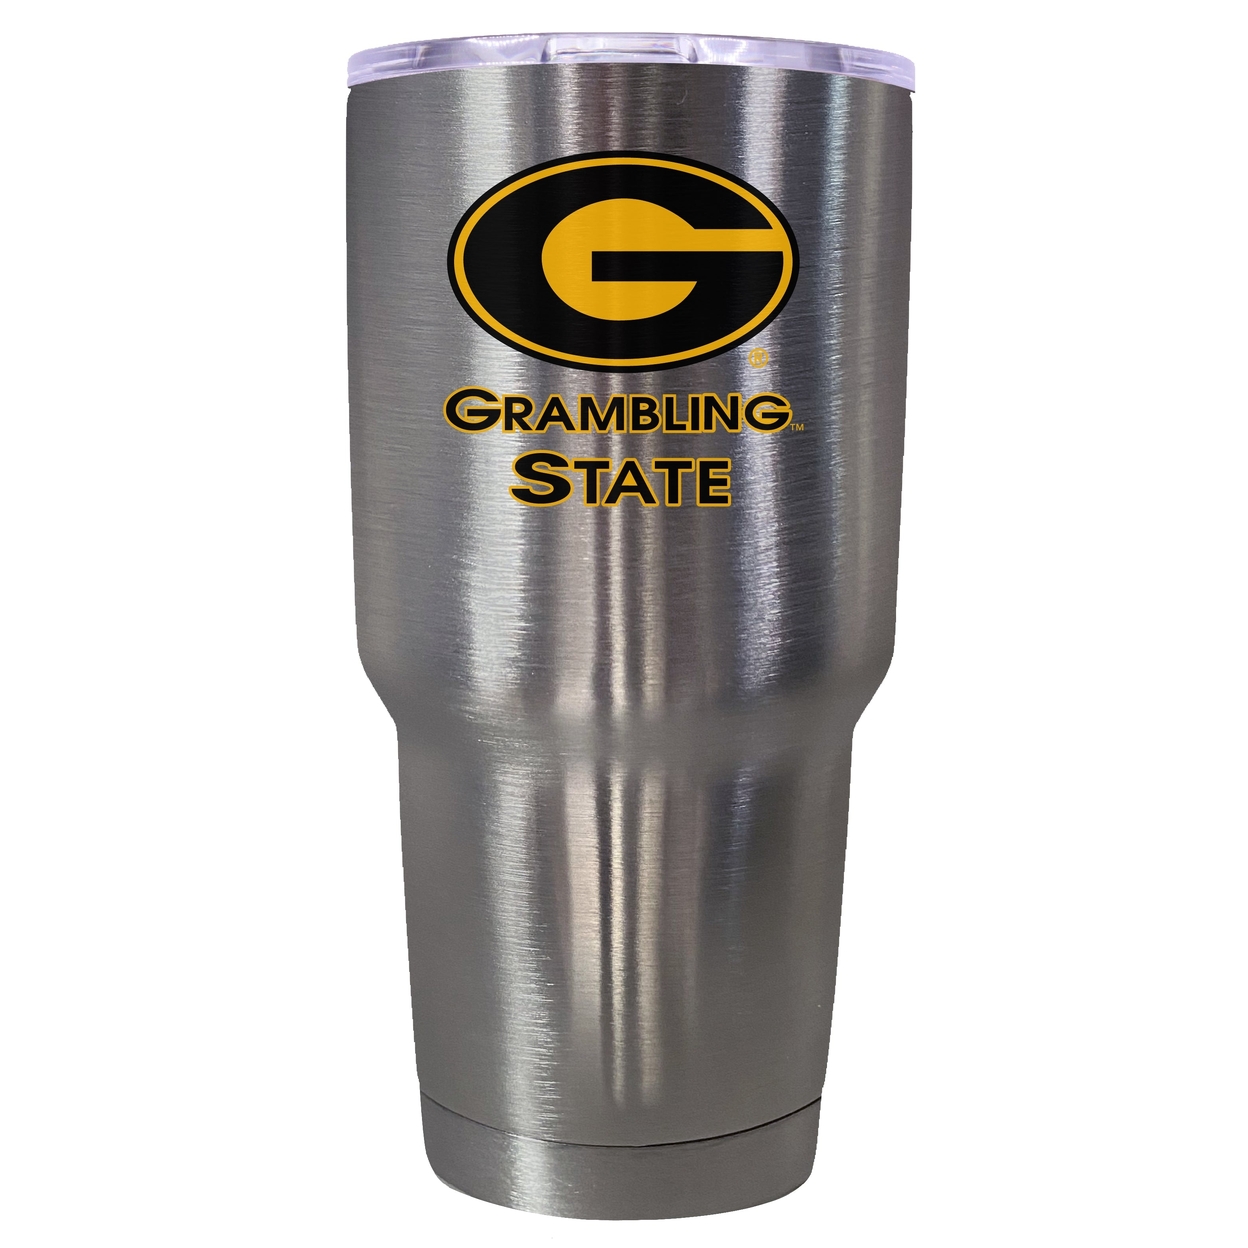 Grambling State Tigers 24 Oz Insulated Stainless Steel Tumbler